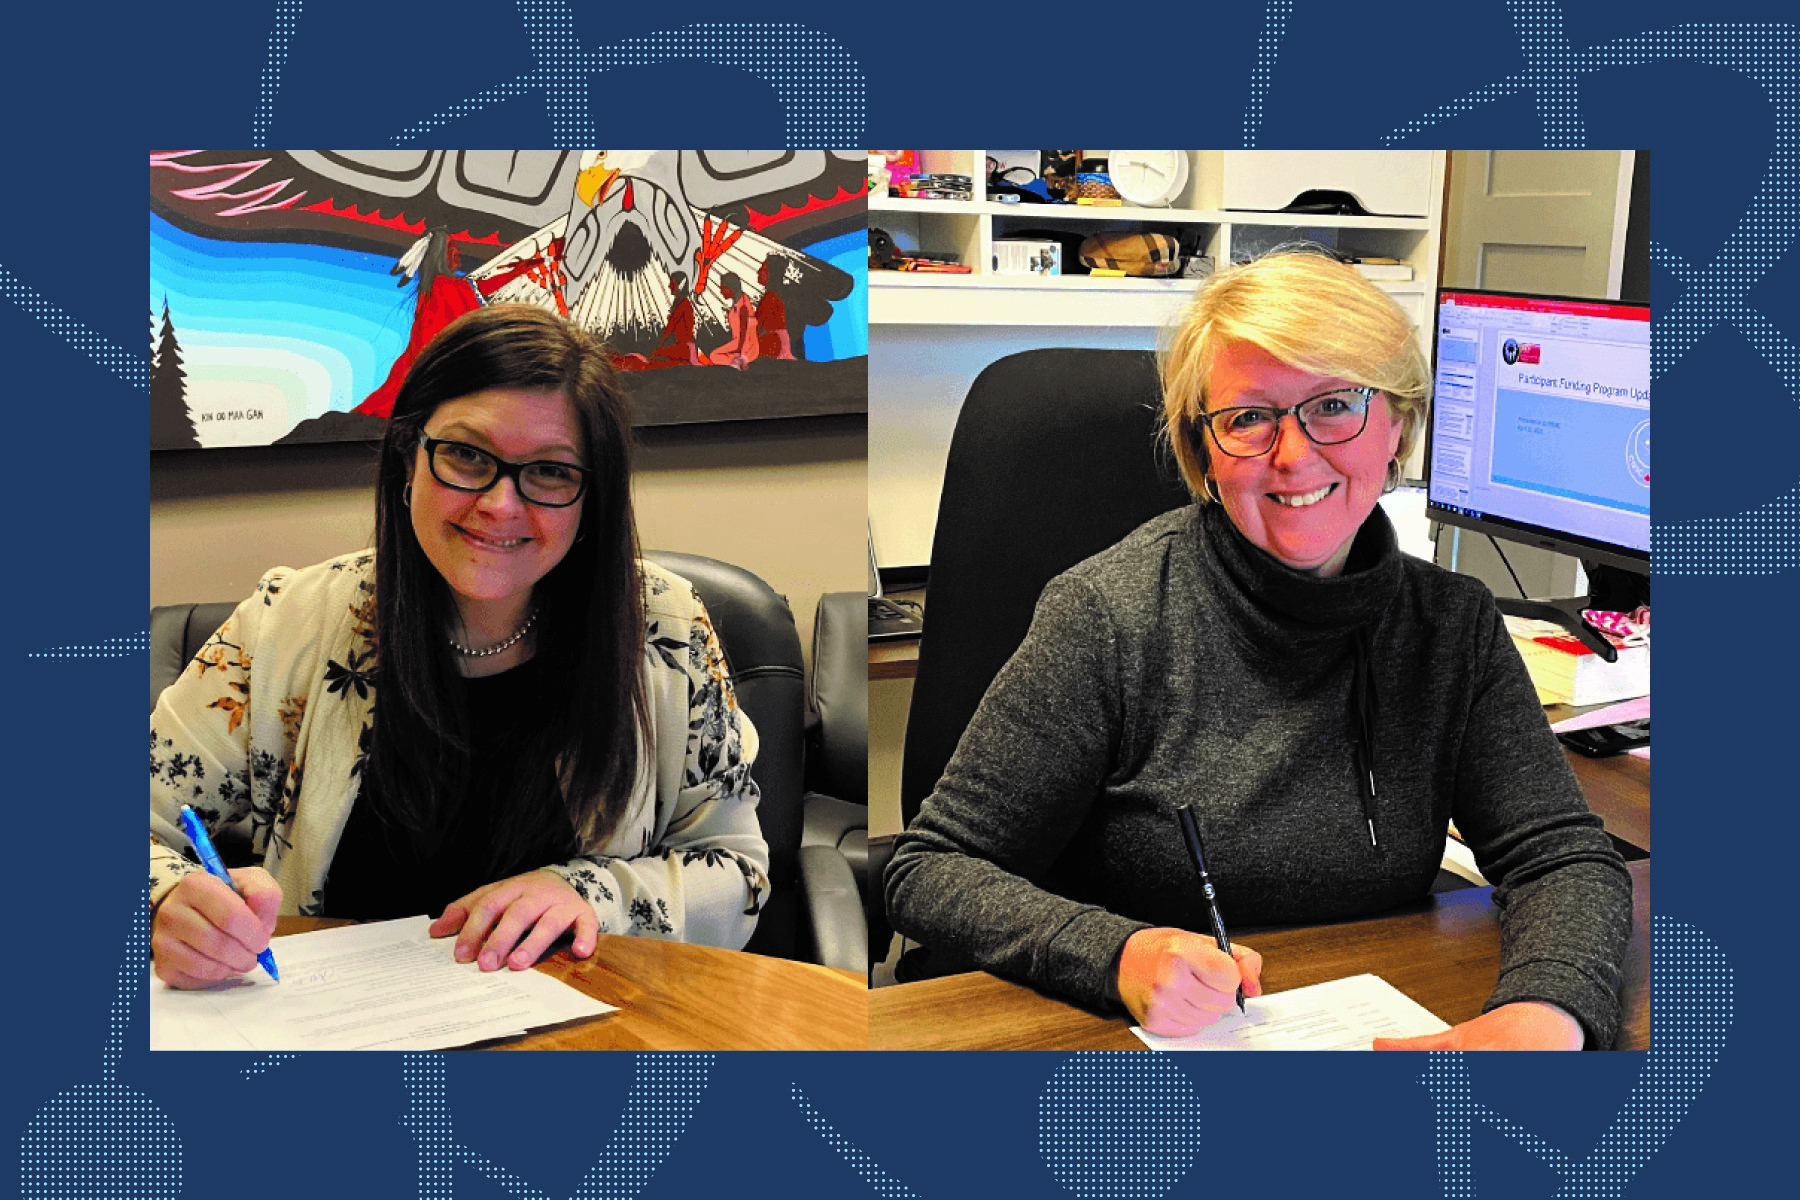 Curve Lake First Nation’s Chief Emily Whetung and Clare Cattrysse, the CNSC’s Director of Indigenous and Stakeholder Relations, signed the terms of reference virtually.